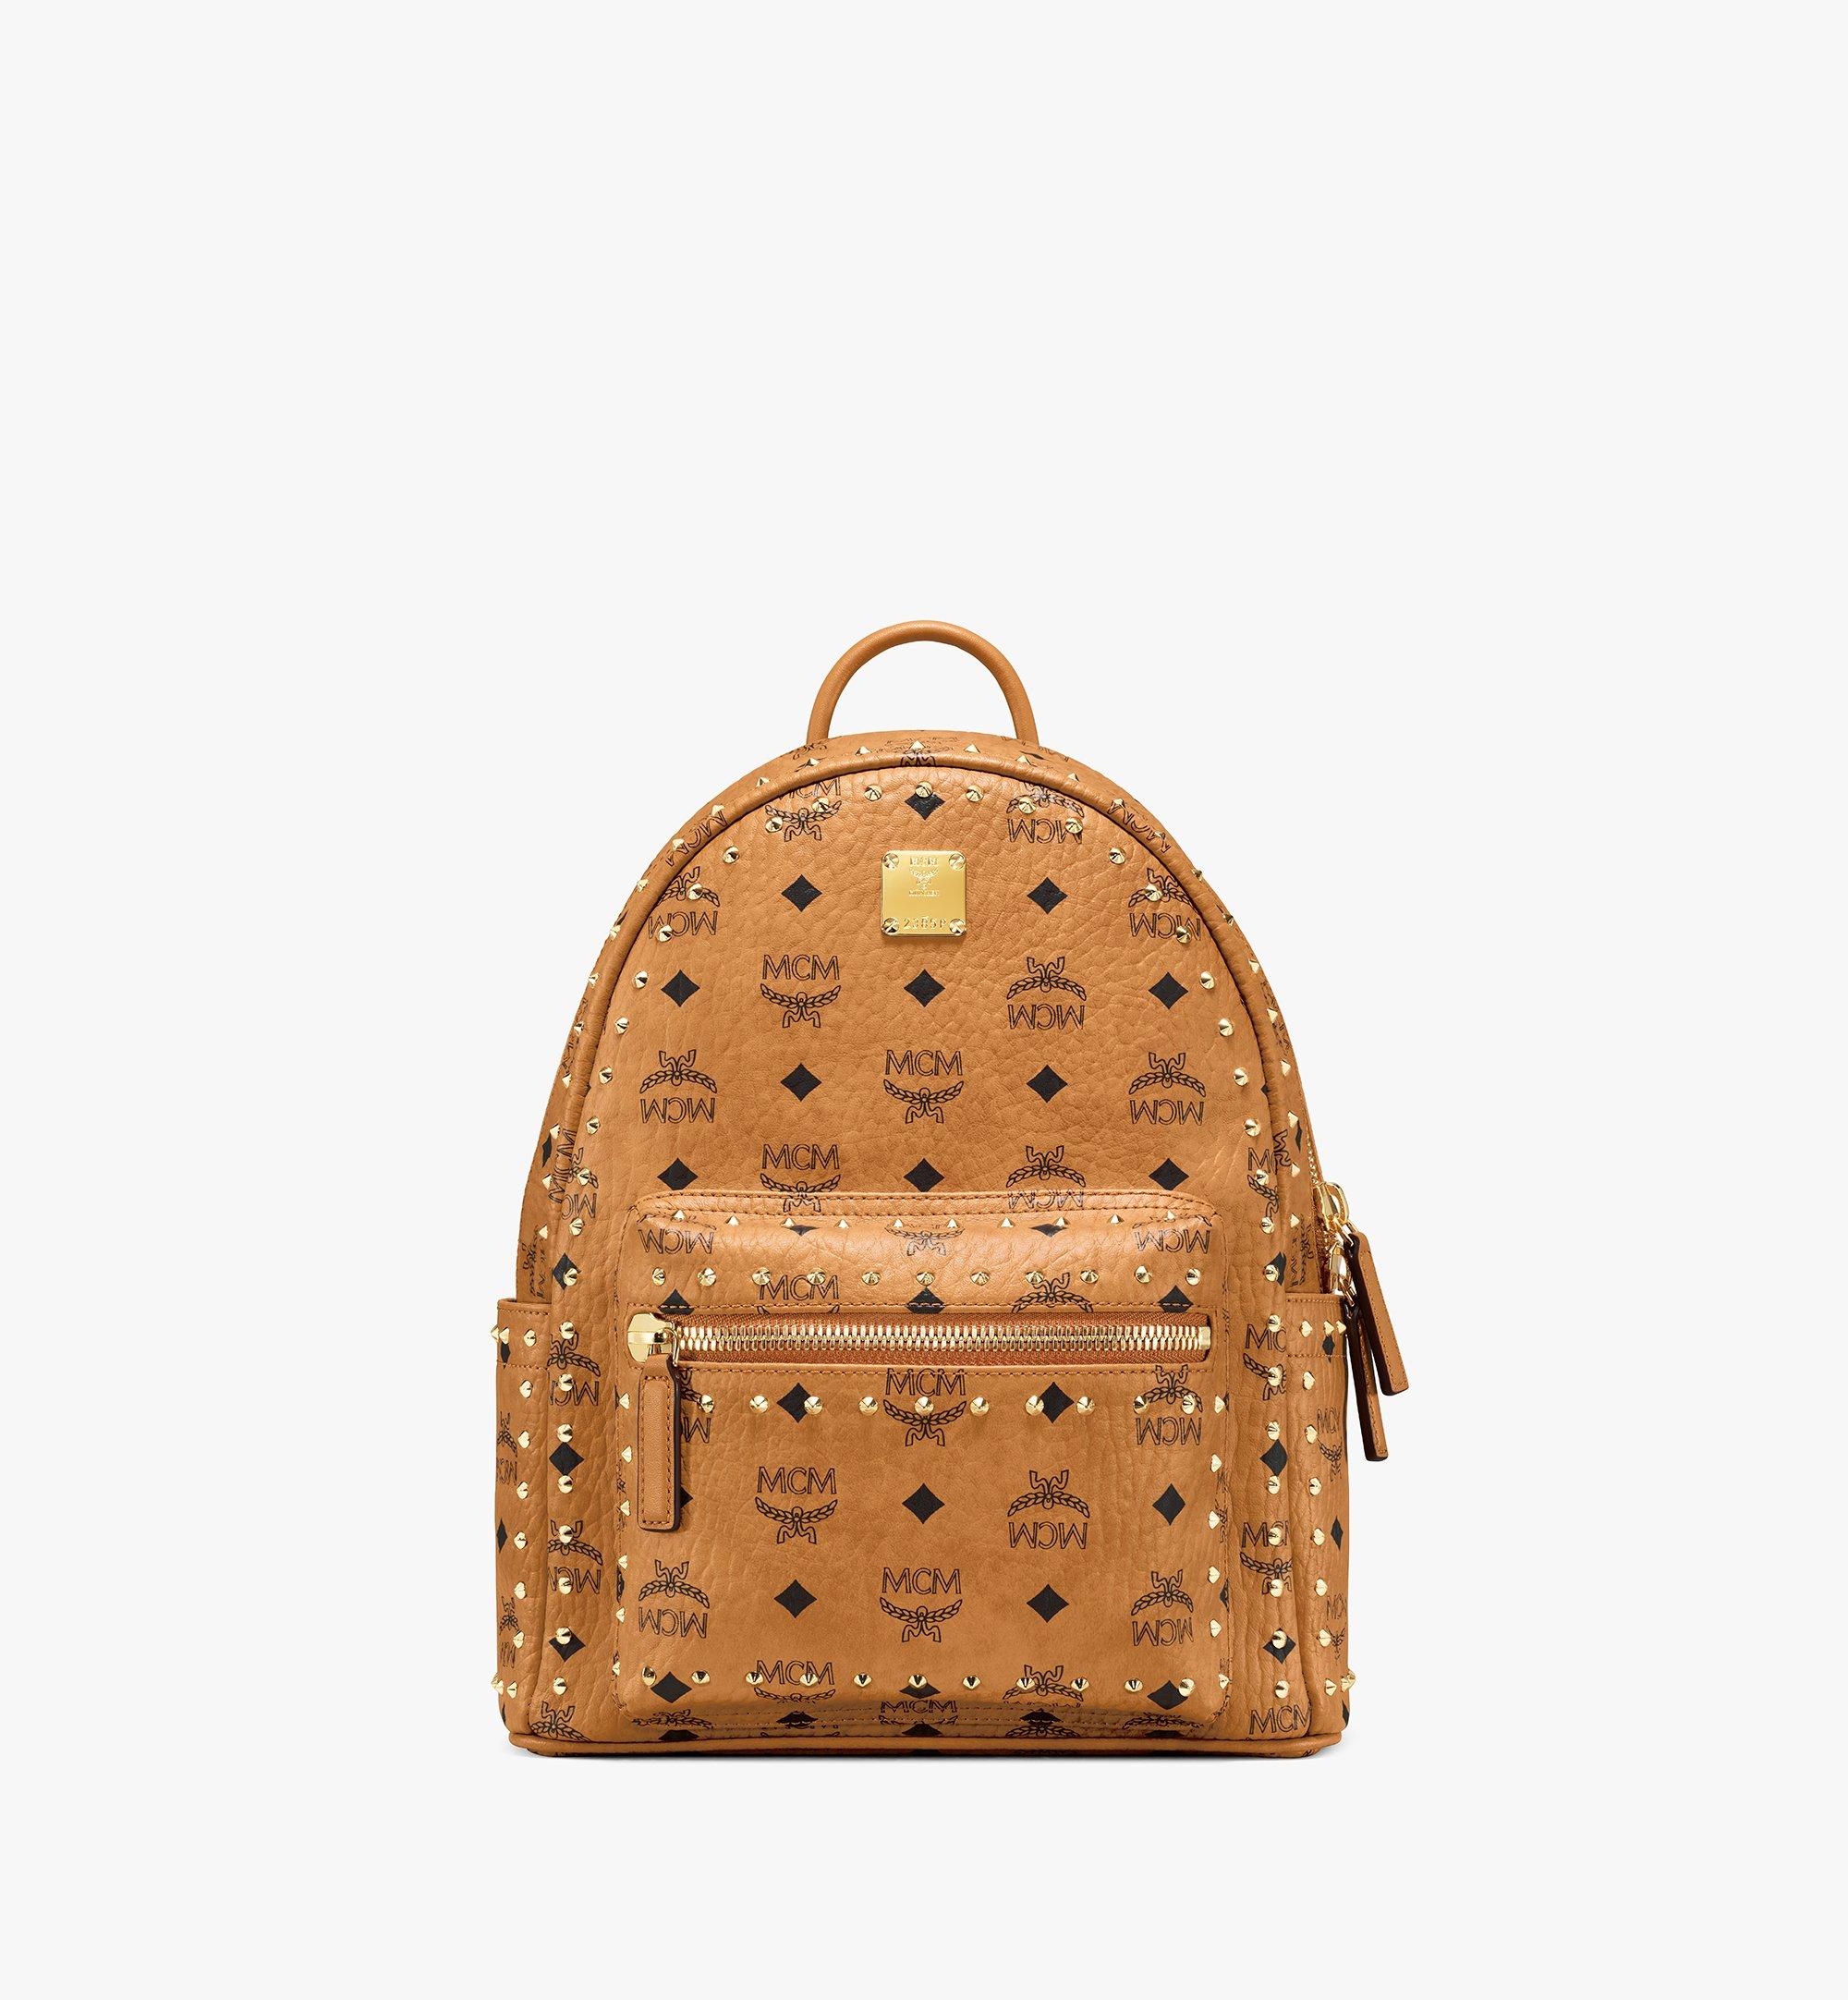 MCM Quilted Studded Visetos Leather Backpack, MCM Handbags